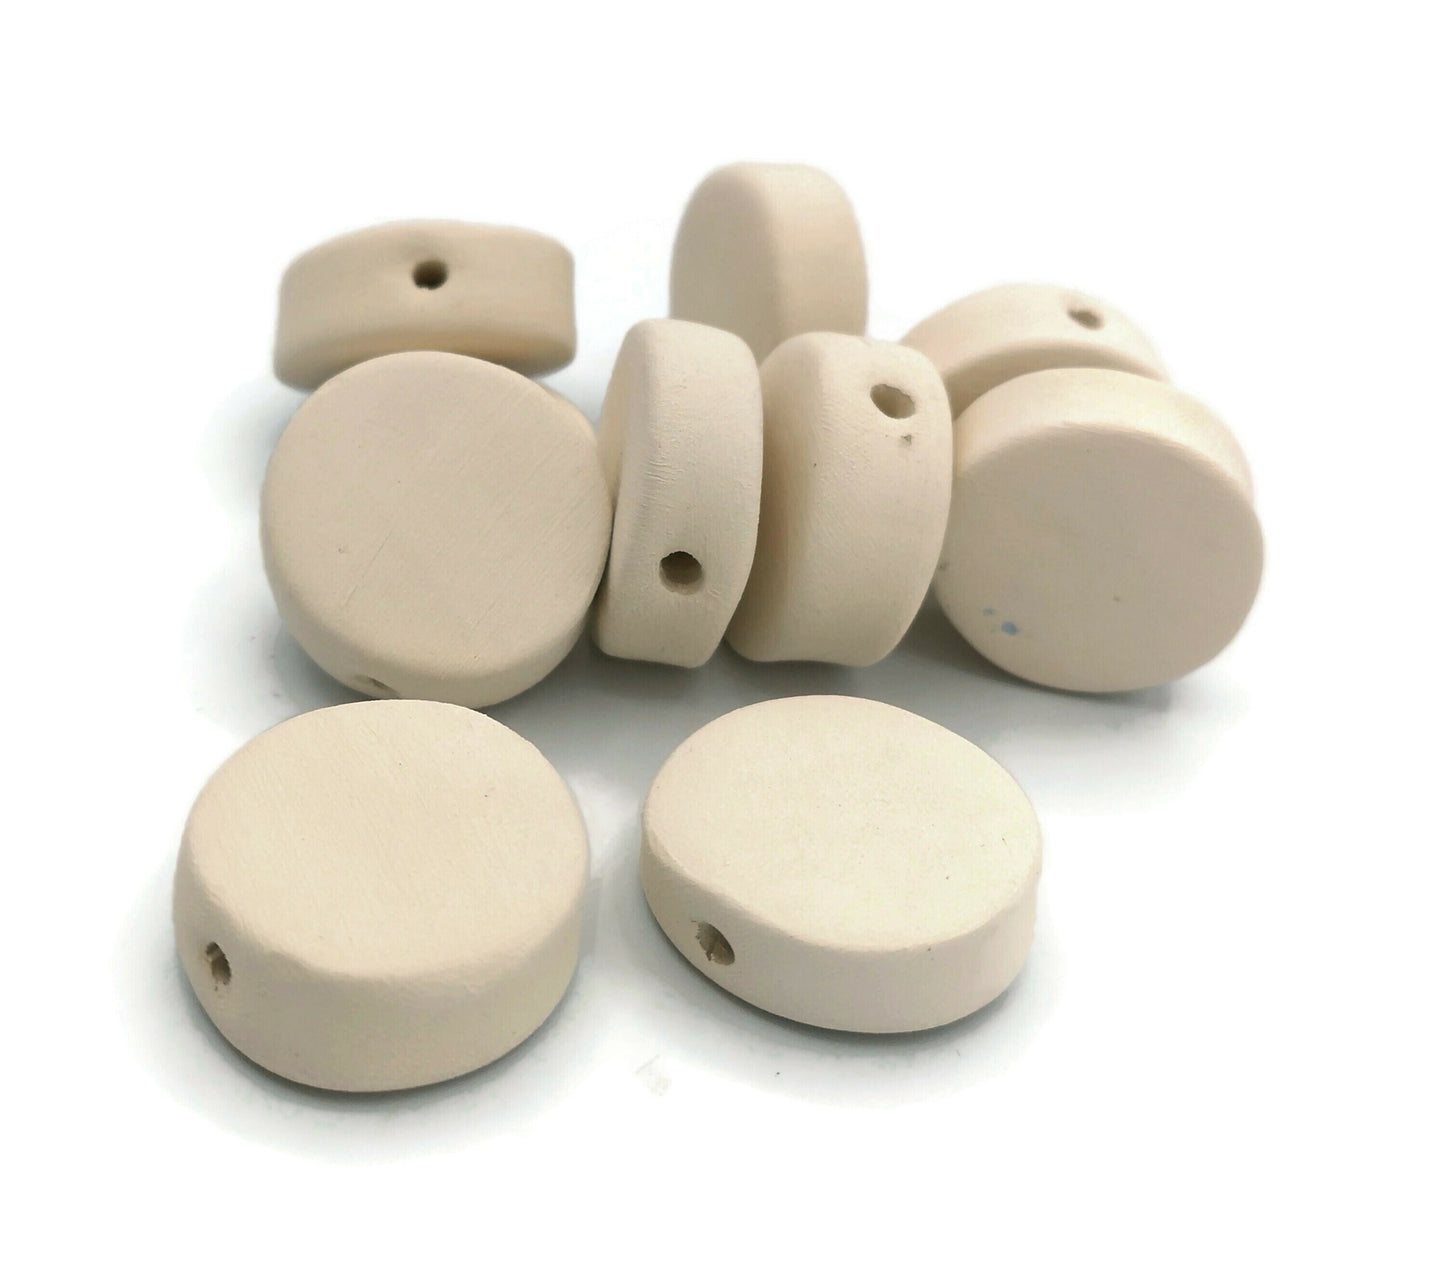 Handmade Ceramic Bisque Coin Bead Set, DIY Ready to Paint Large Blank Disc Tile for Jewelry or Crafting - Ceramica Ana Rafael